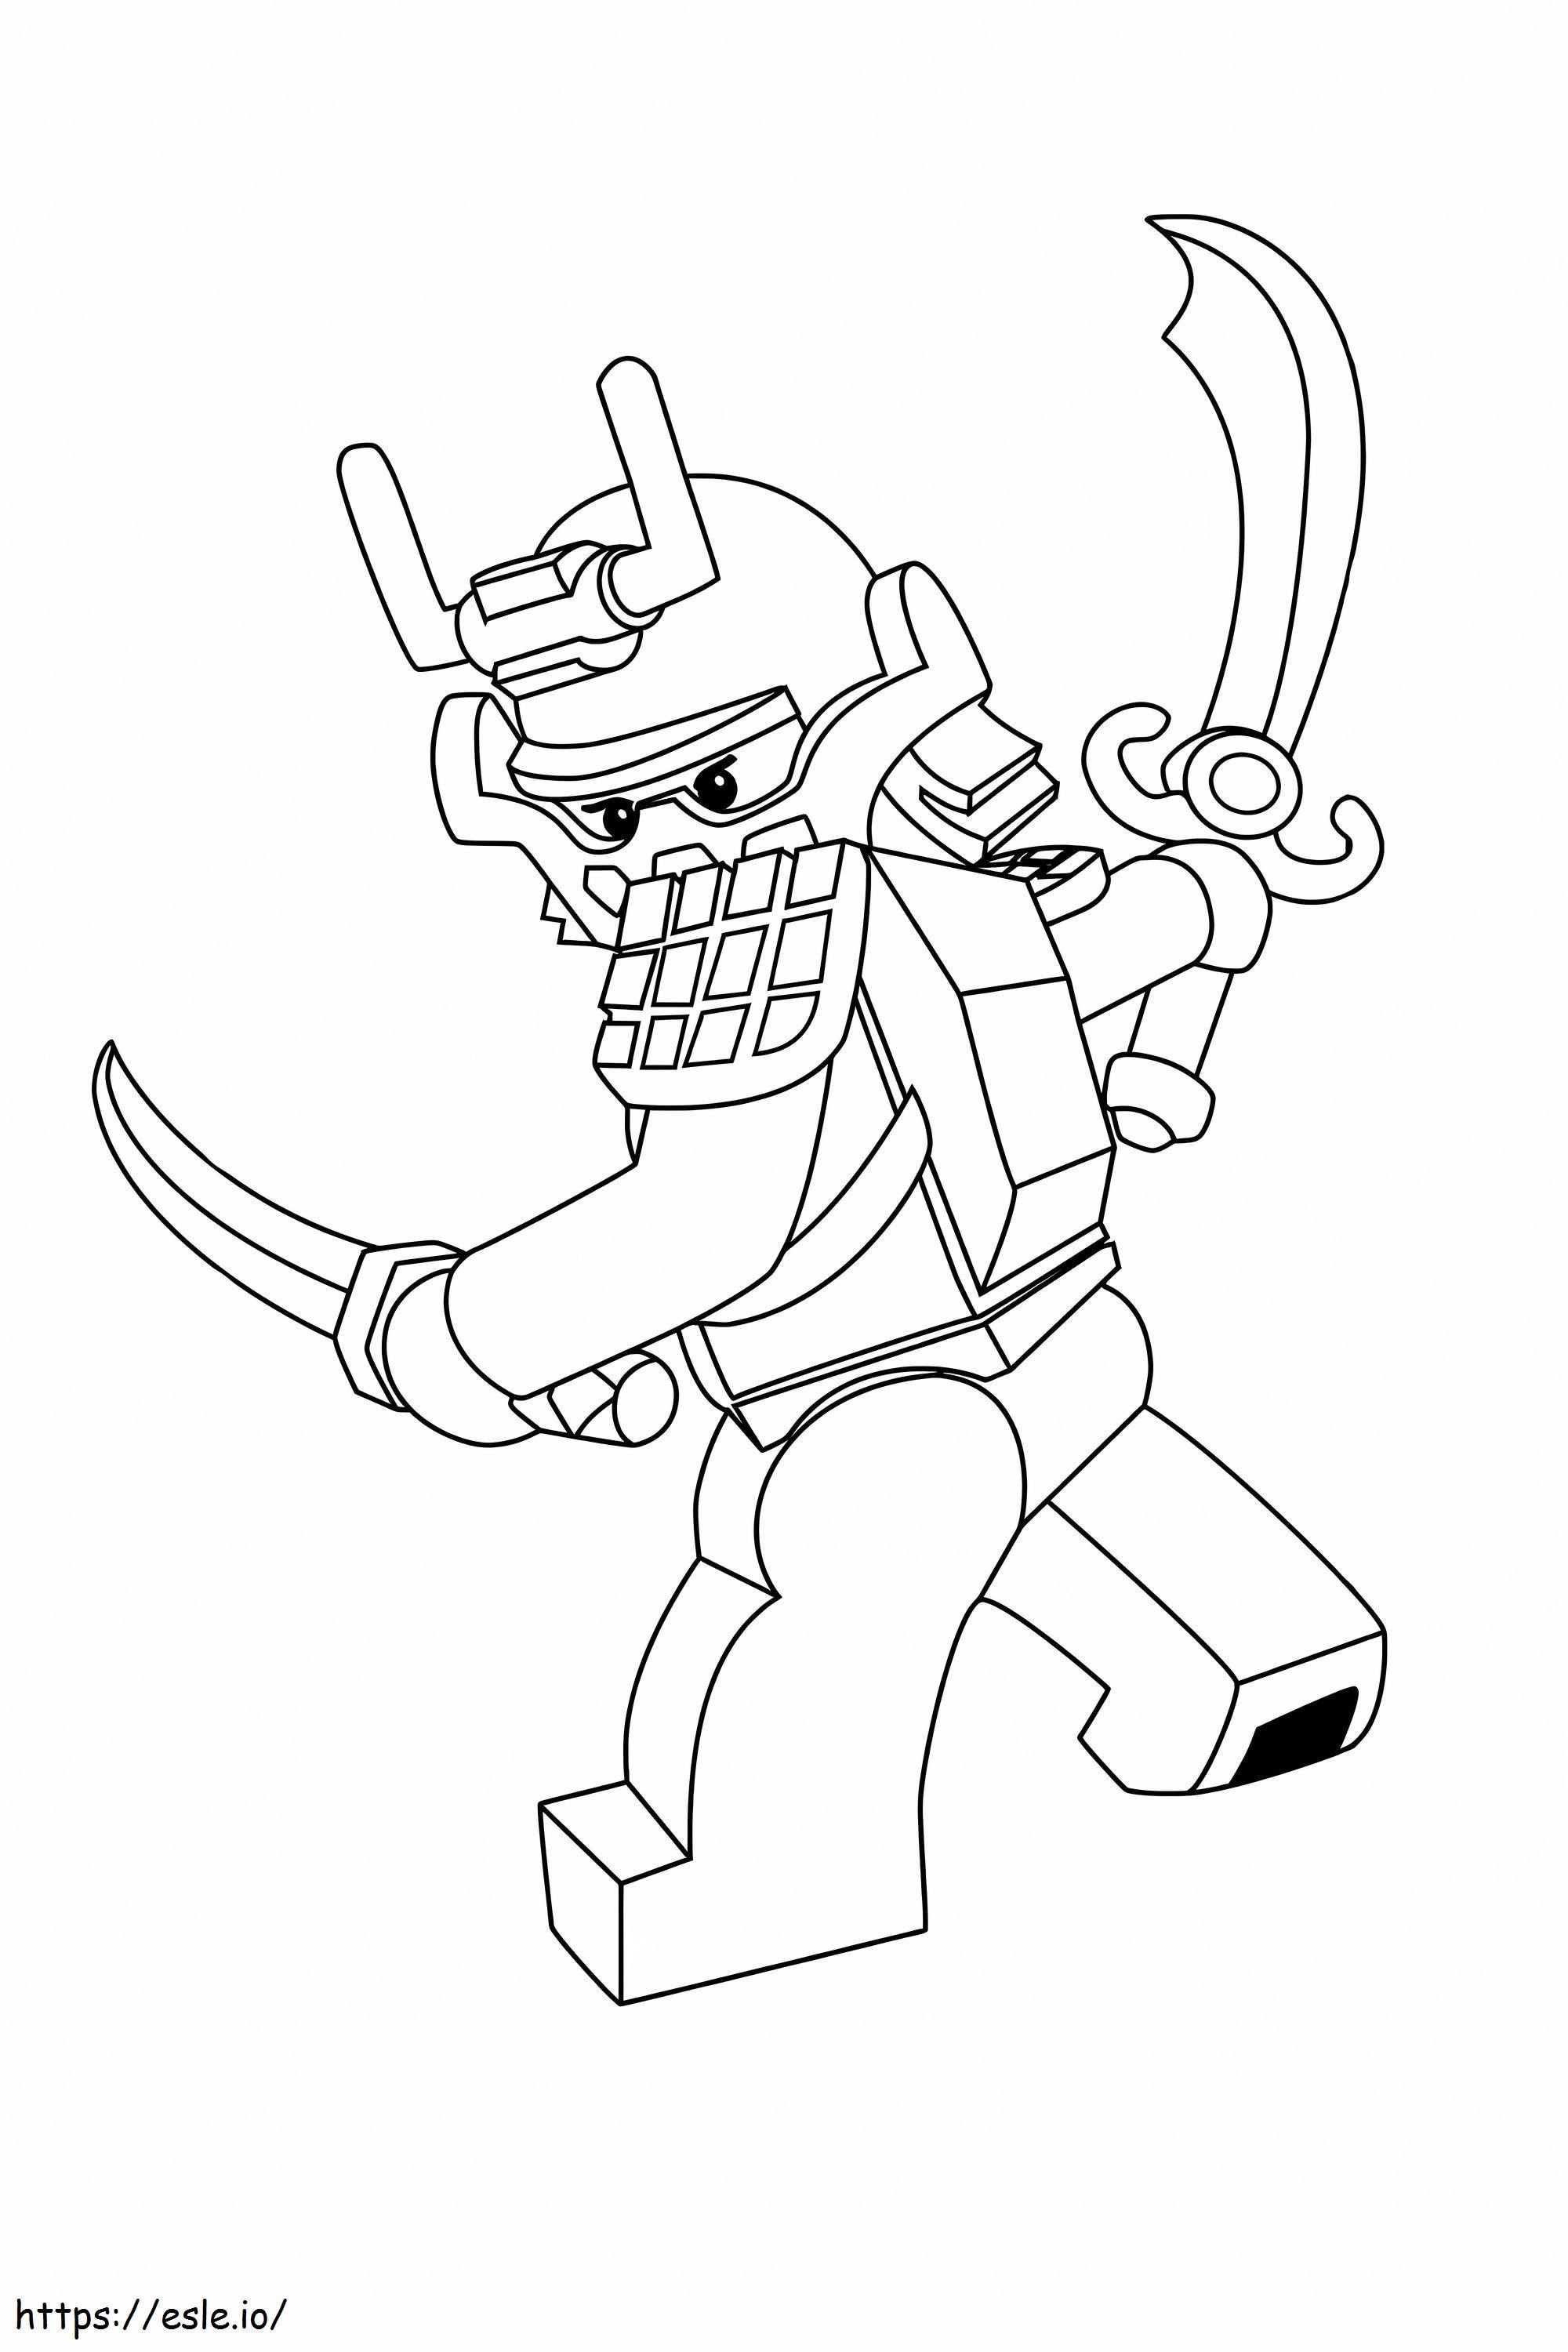 Lego Samurai Holding Two Swords coloring page